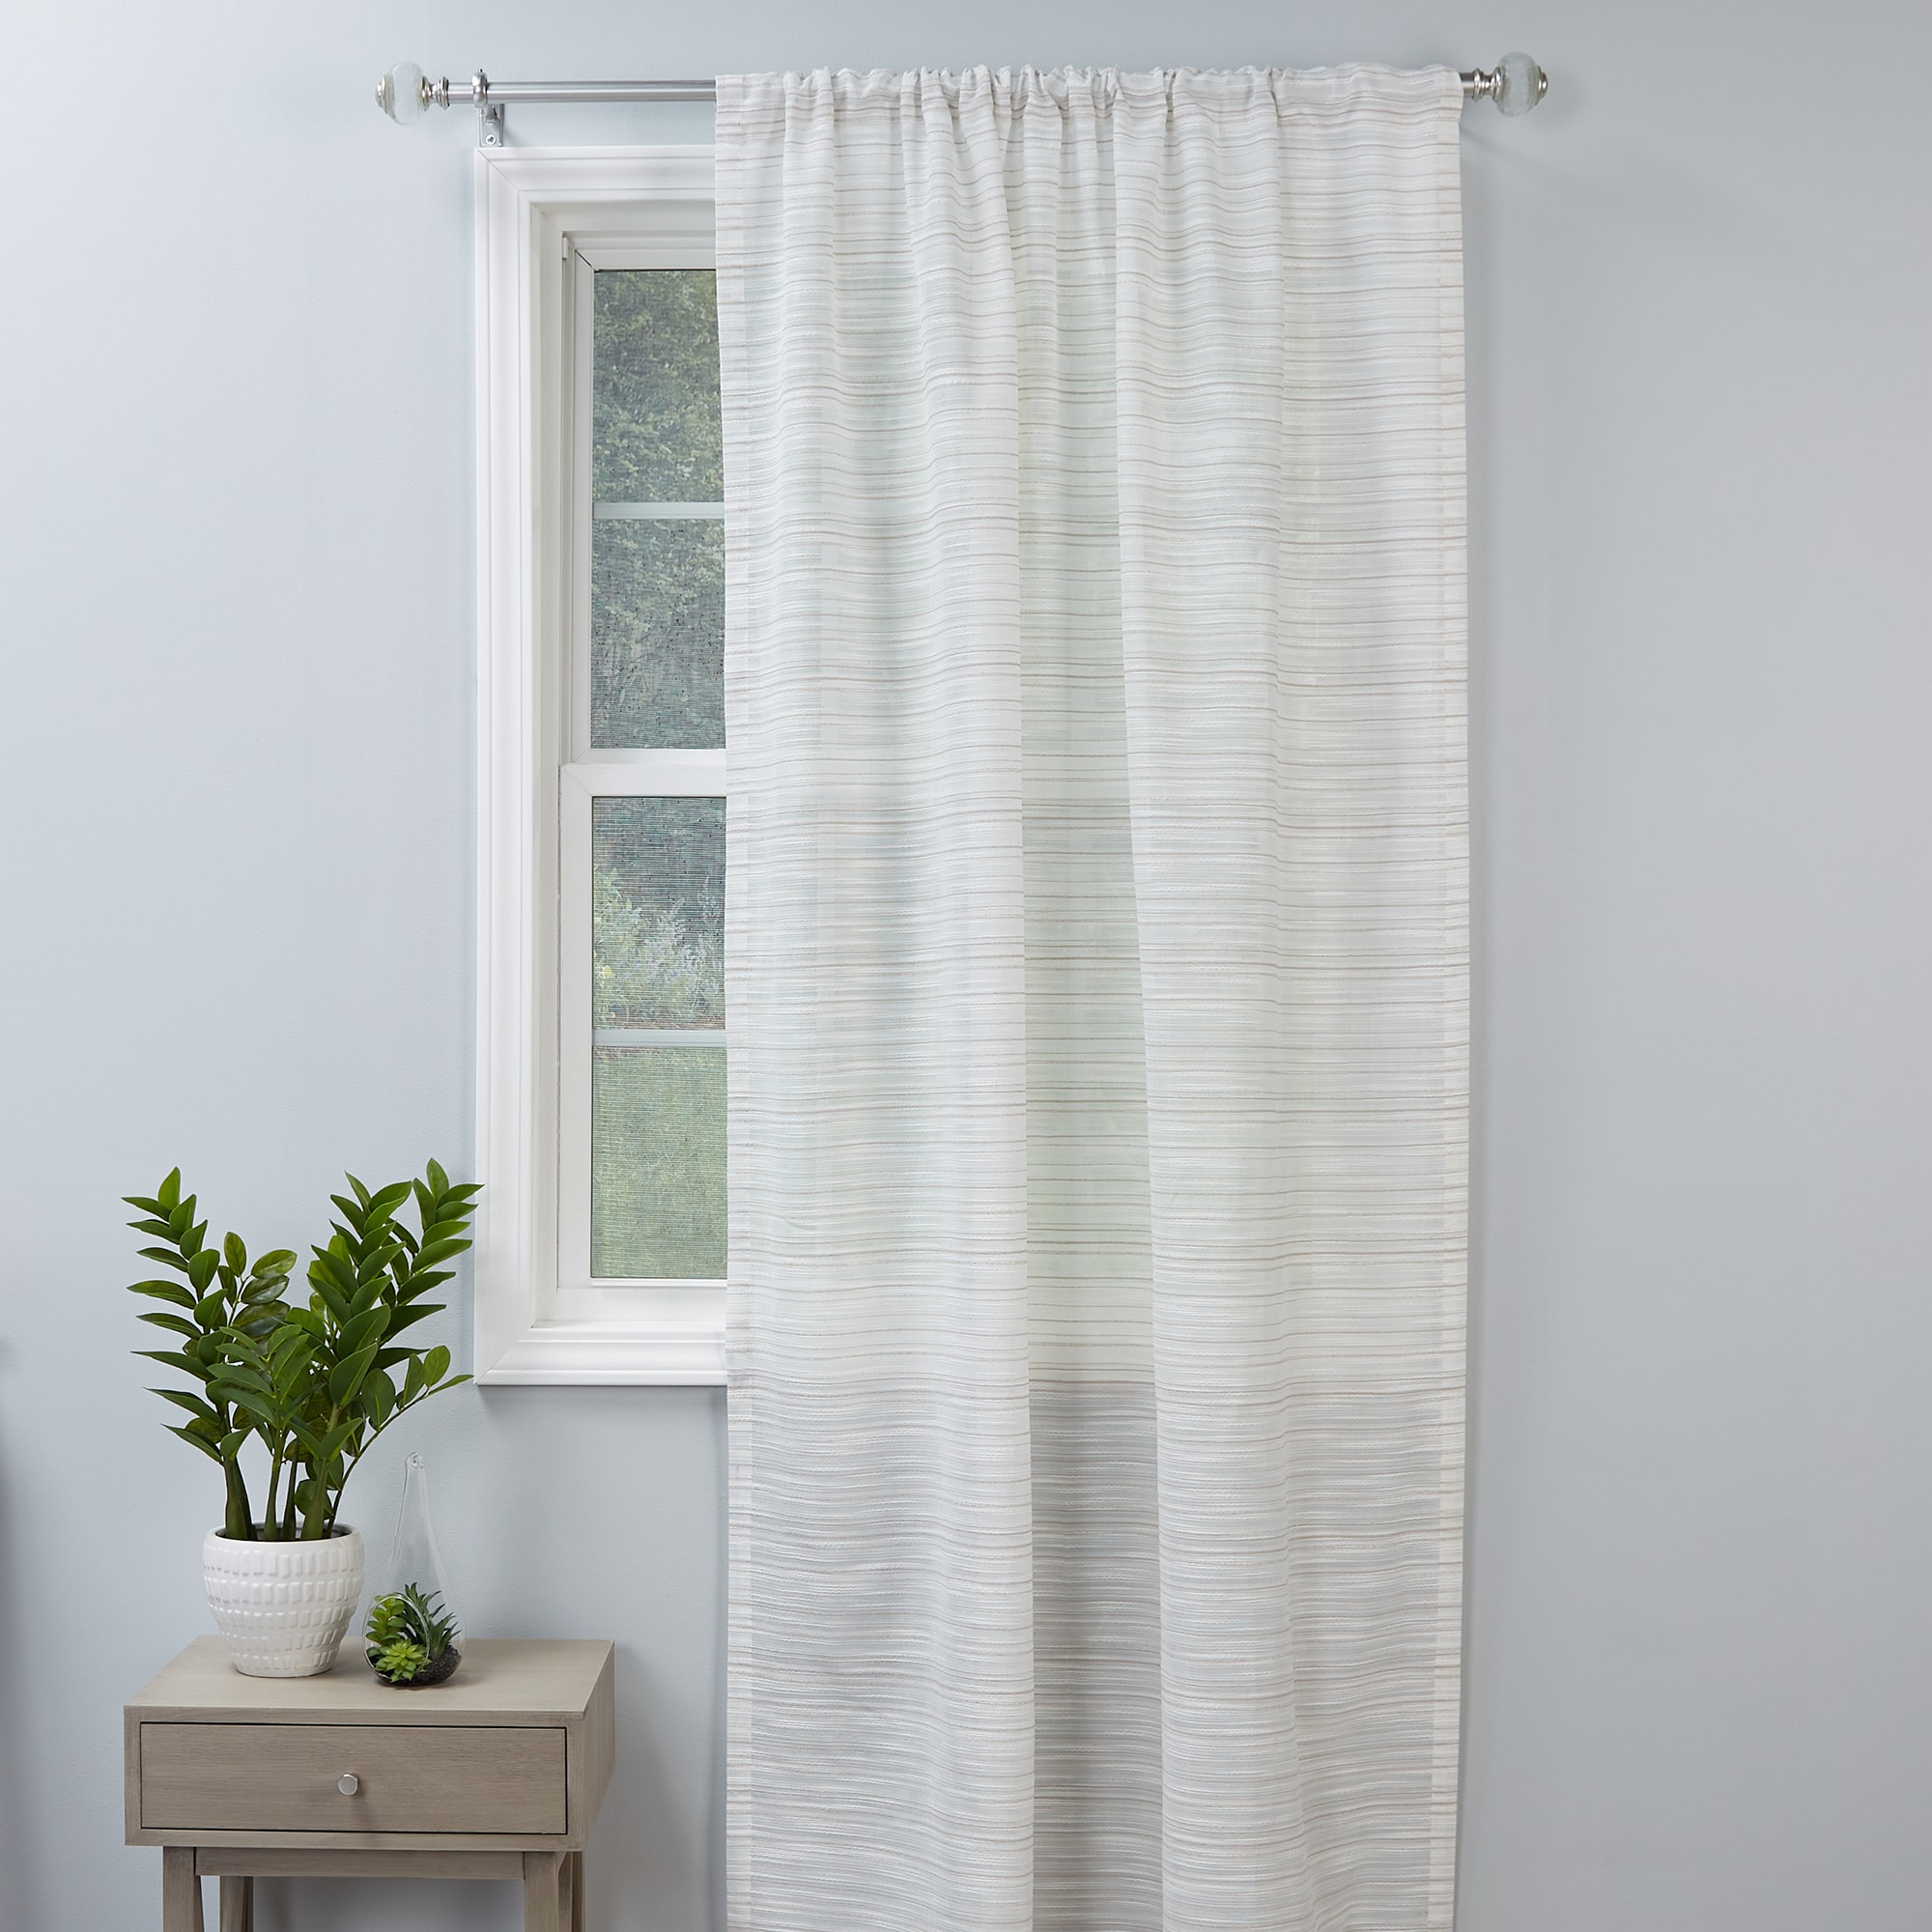 Rod 84-in in Light the & allen Filtering department Drapes Pocket Single roth + Curtain at Panel Curtains Taupe